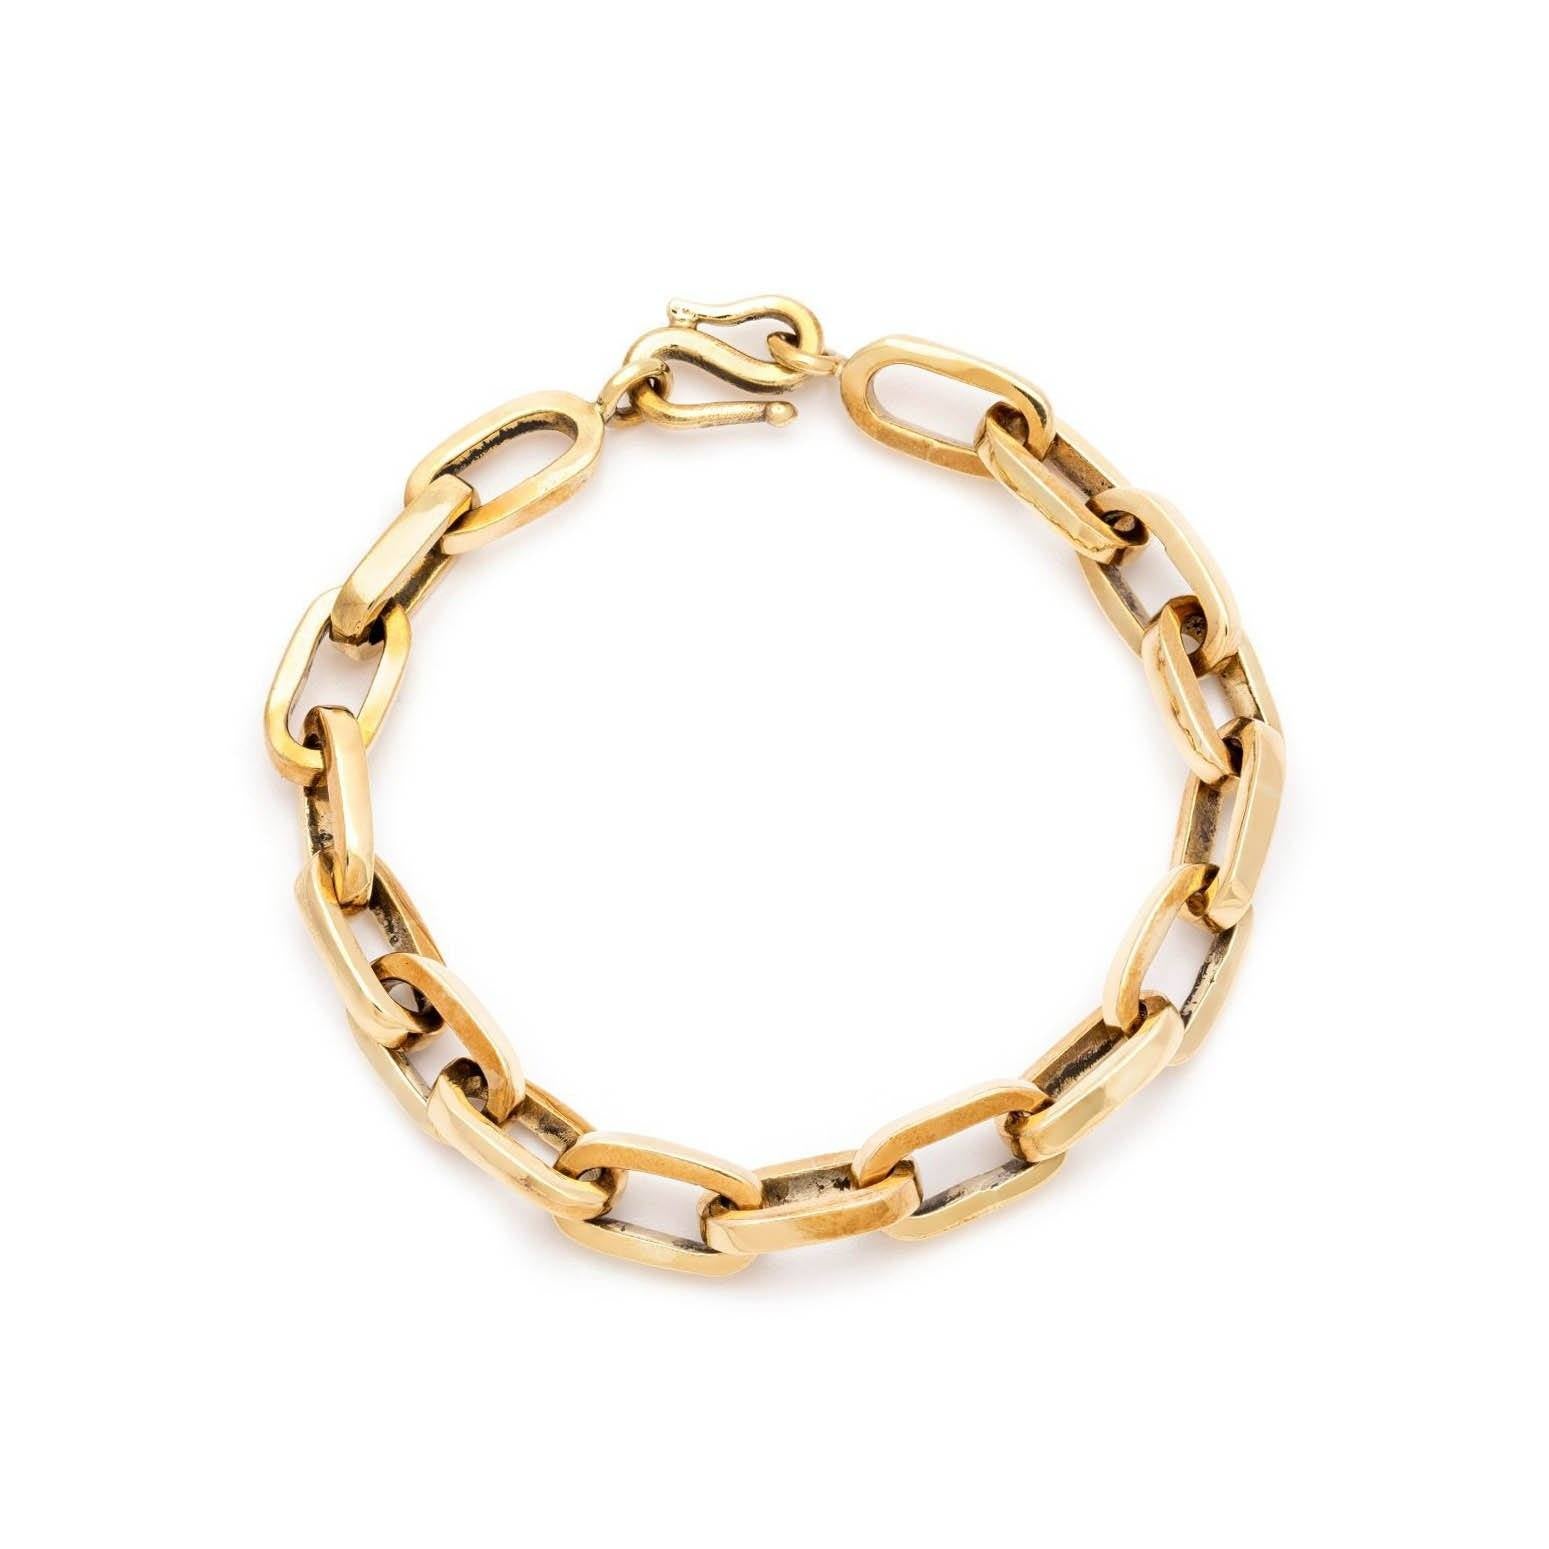 Chain Link Bracelet Jewelry 18K Gold Plated 